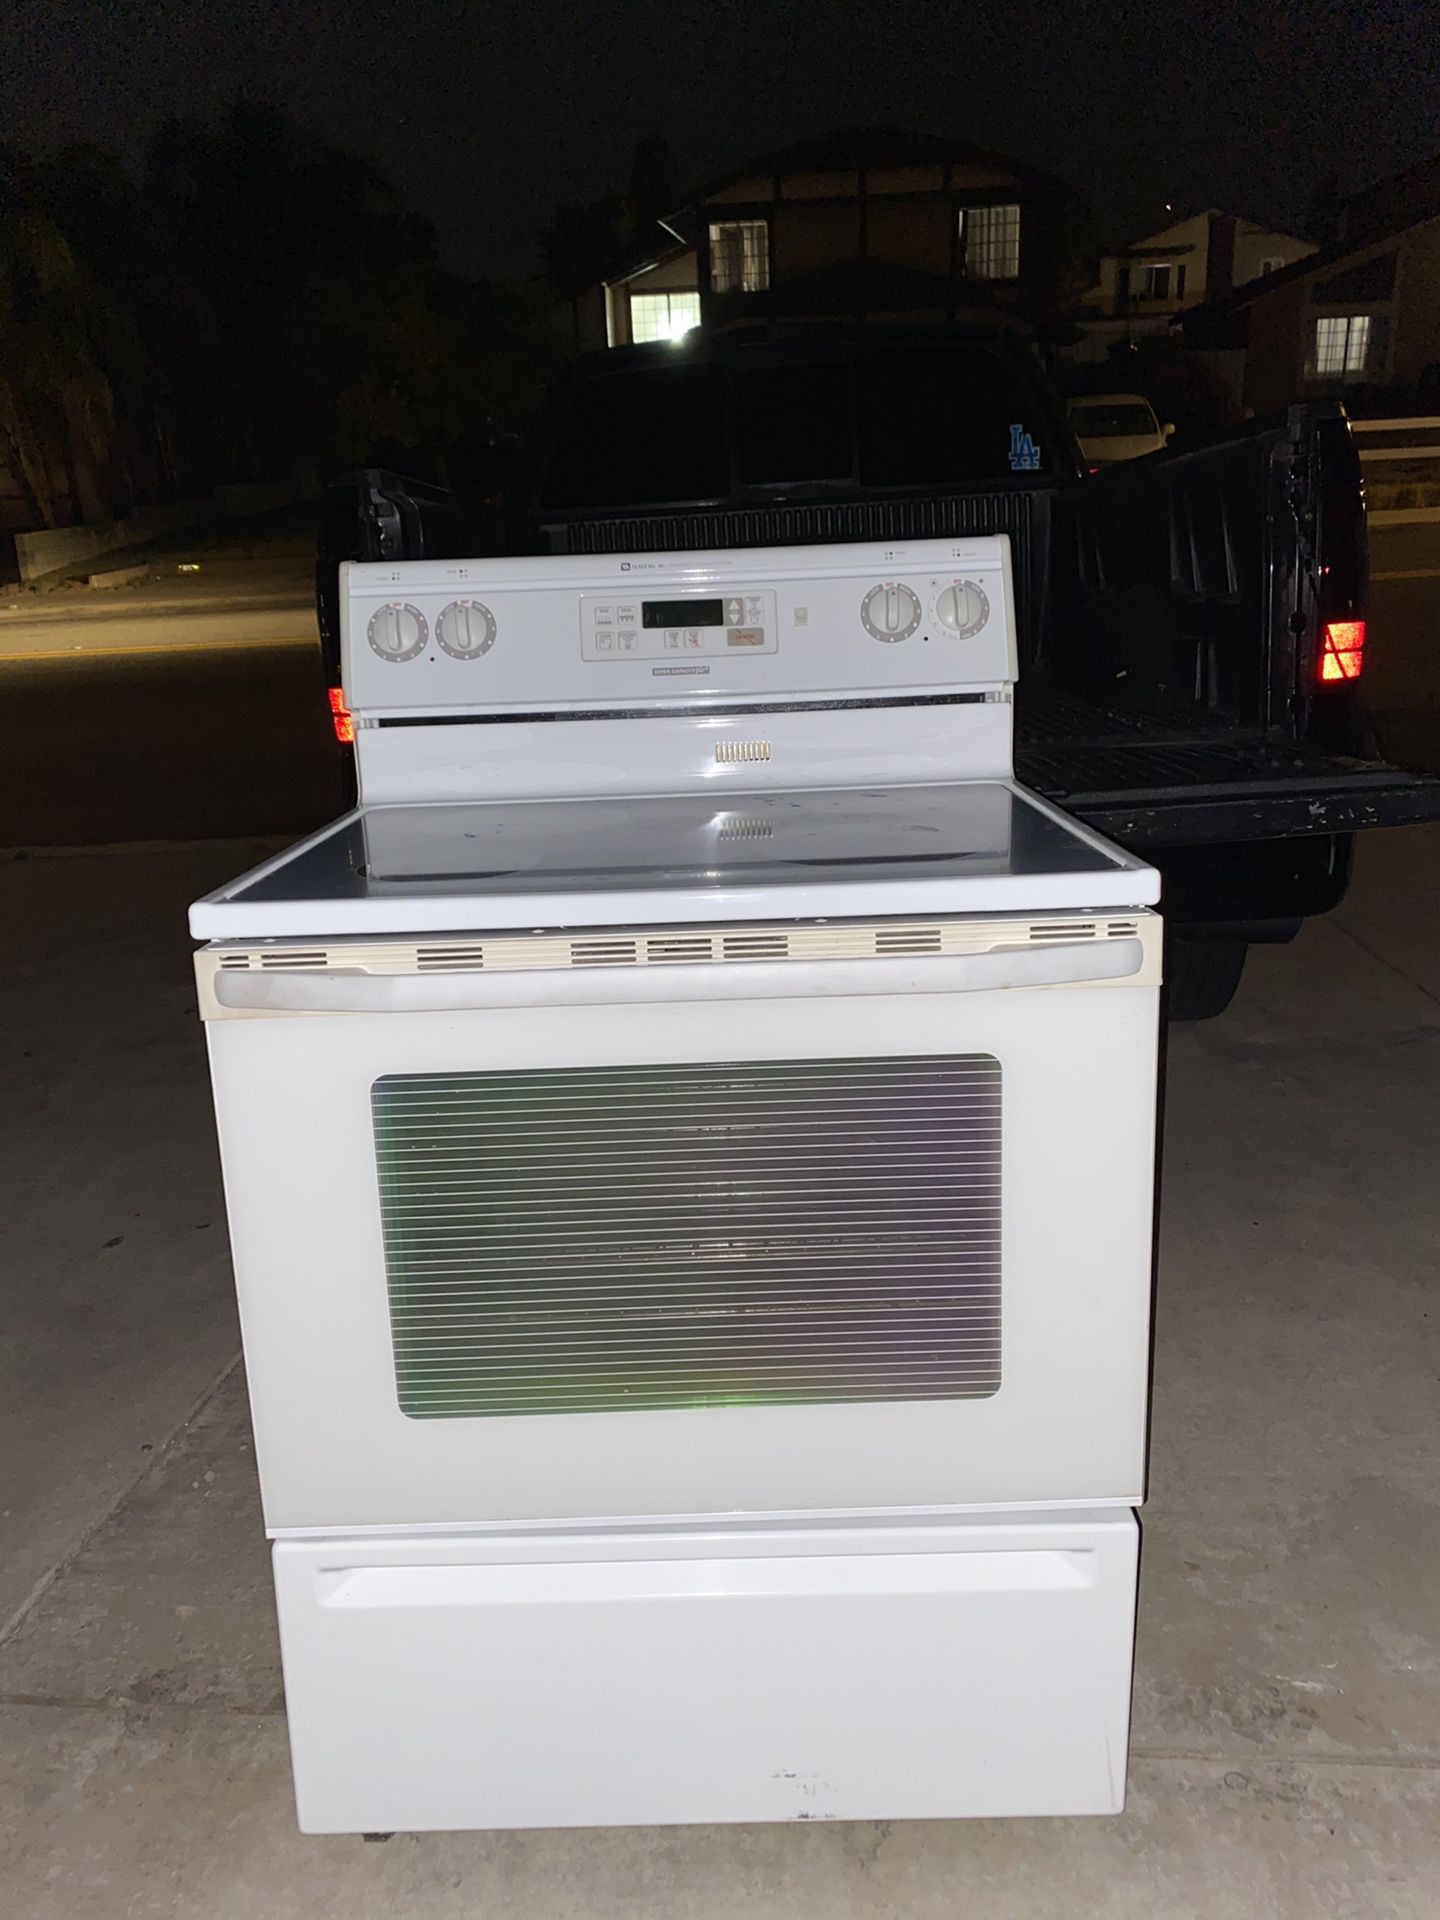 Electric stove Maytag